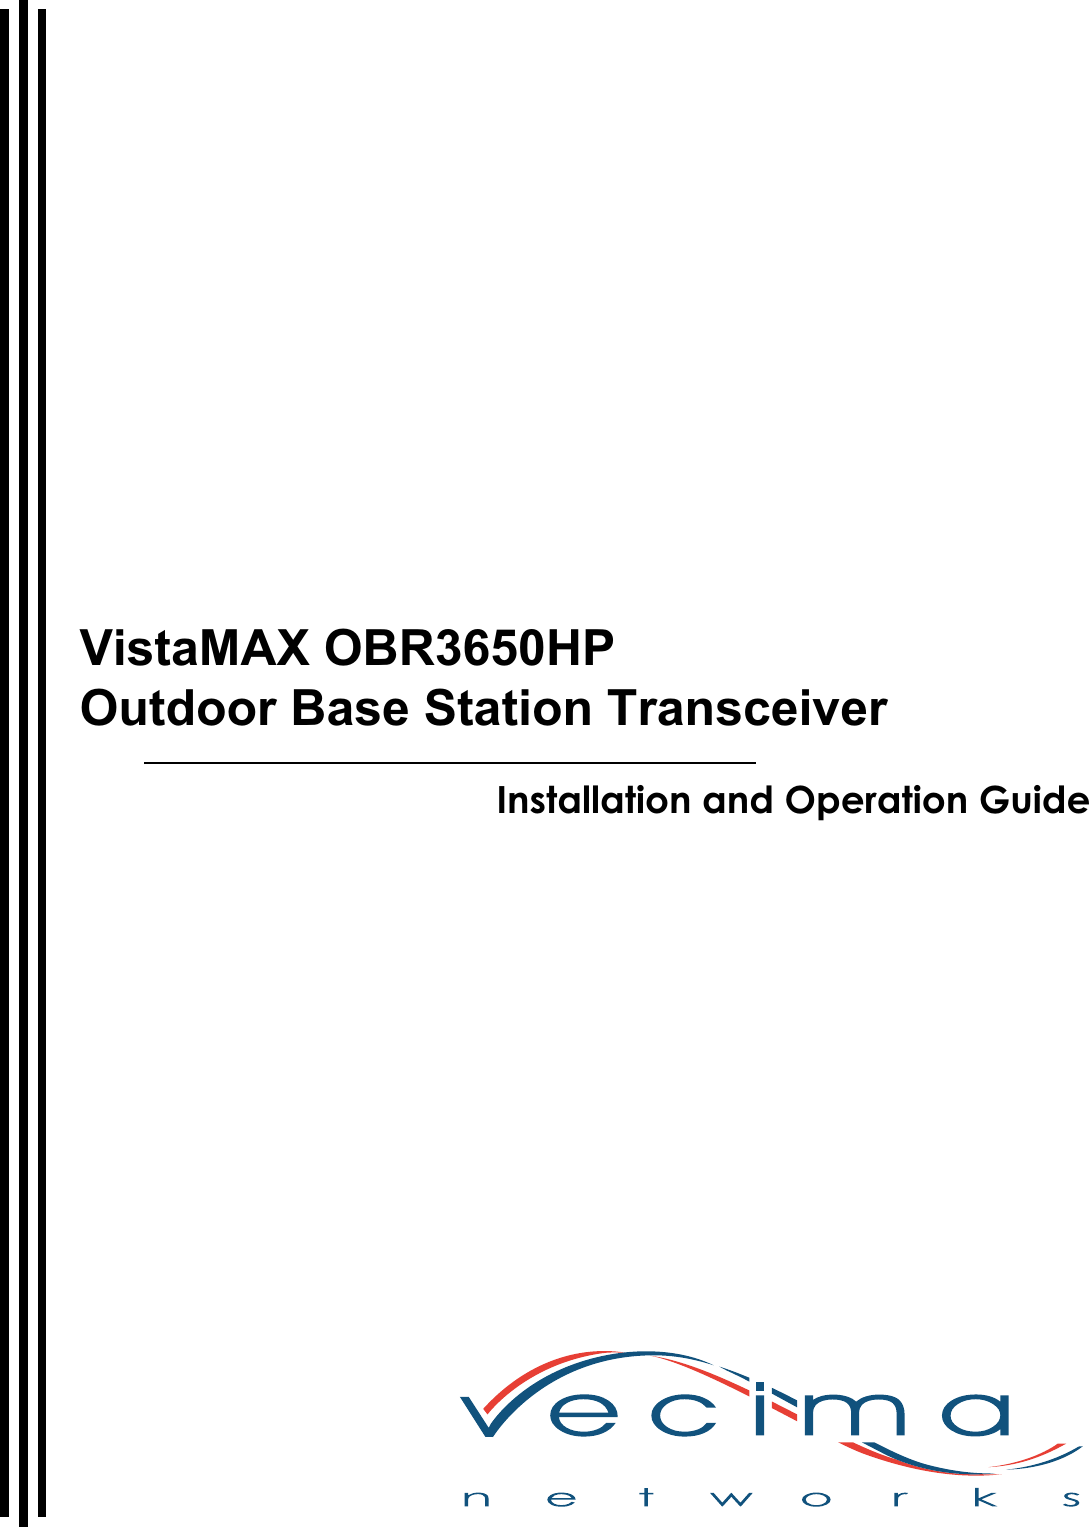                Installation and Operation GuideVistaMAX OBR3650HPOutdoor Base Station Transceiver